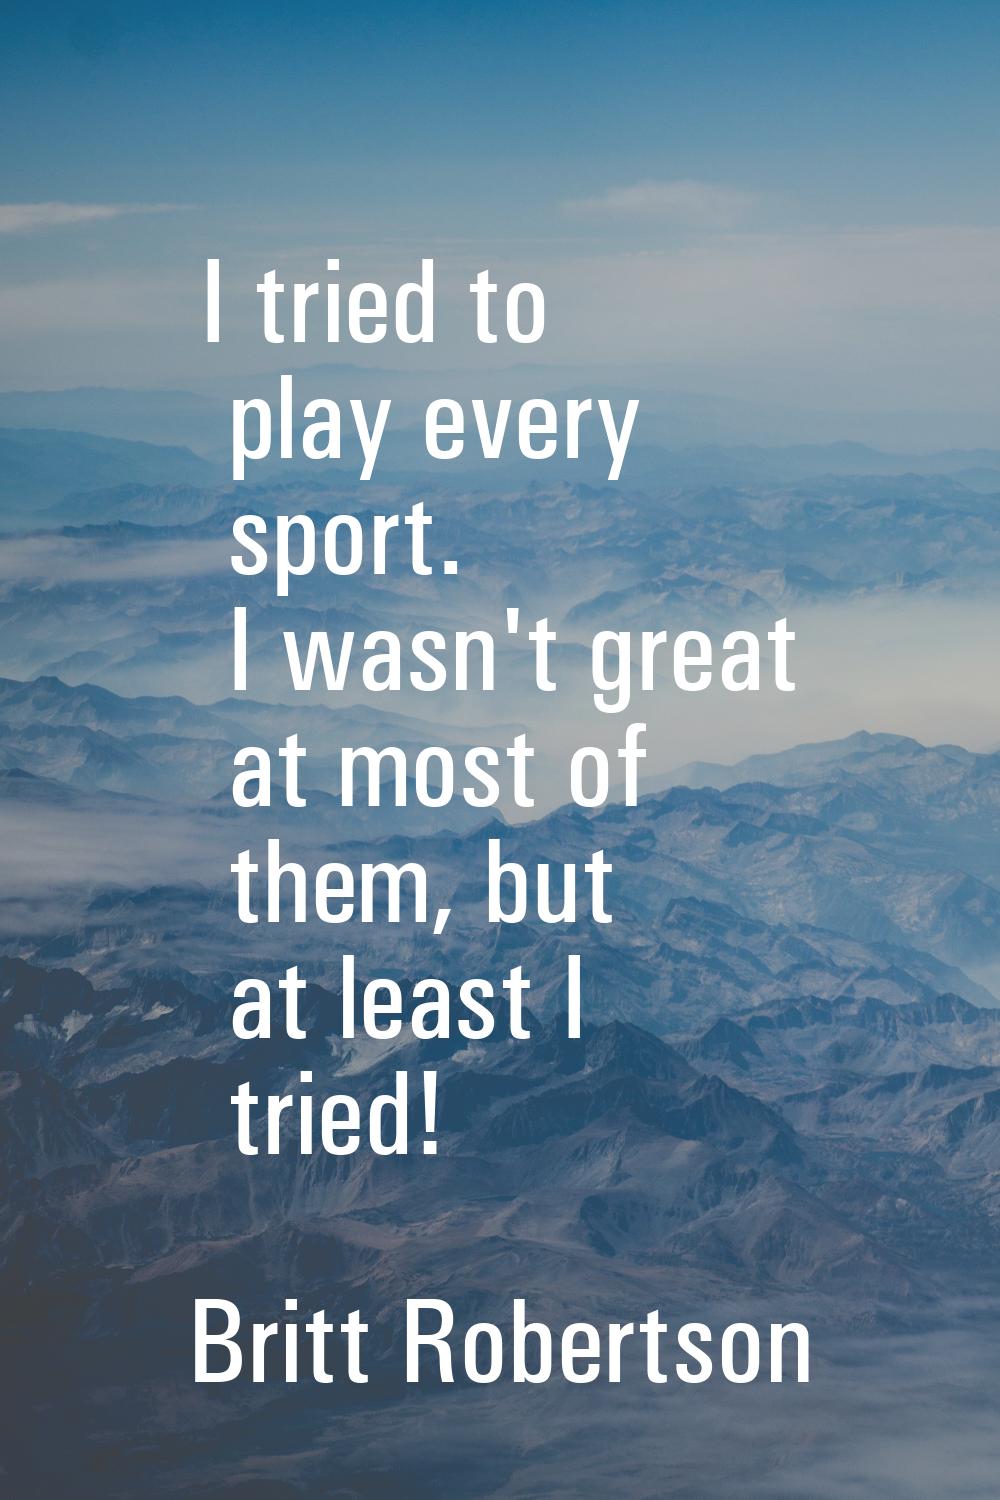 I tried to play every sport. I wasn't great at most of them, but at least I tried!